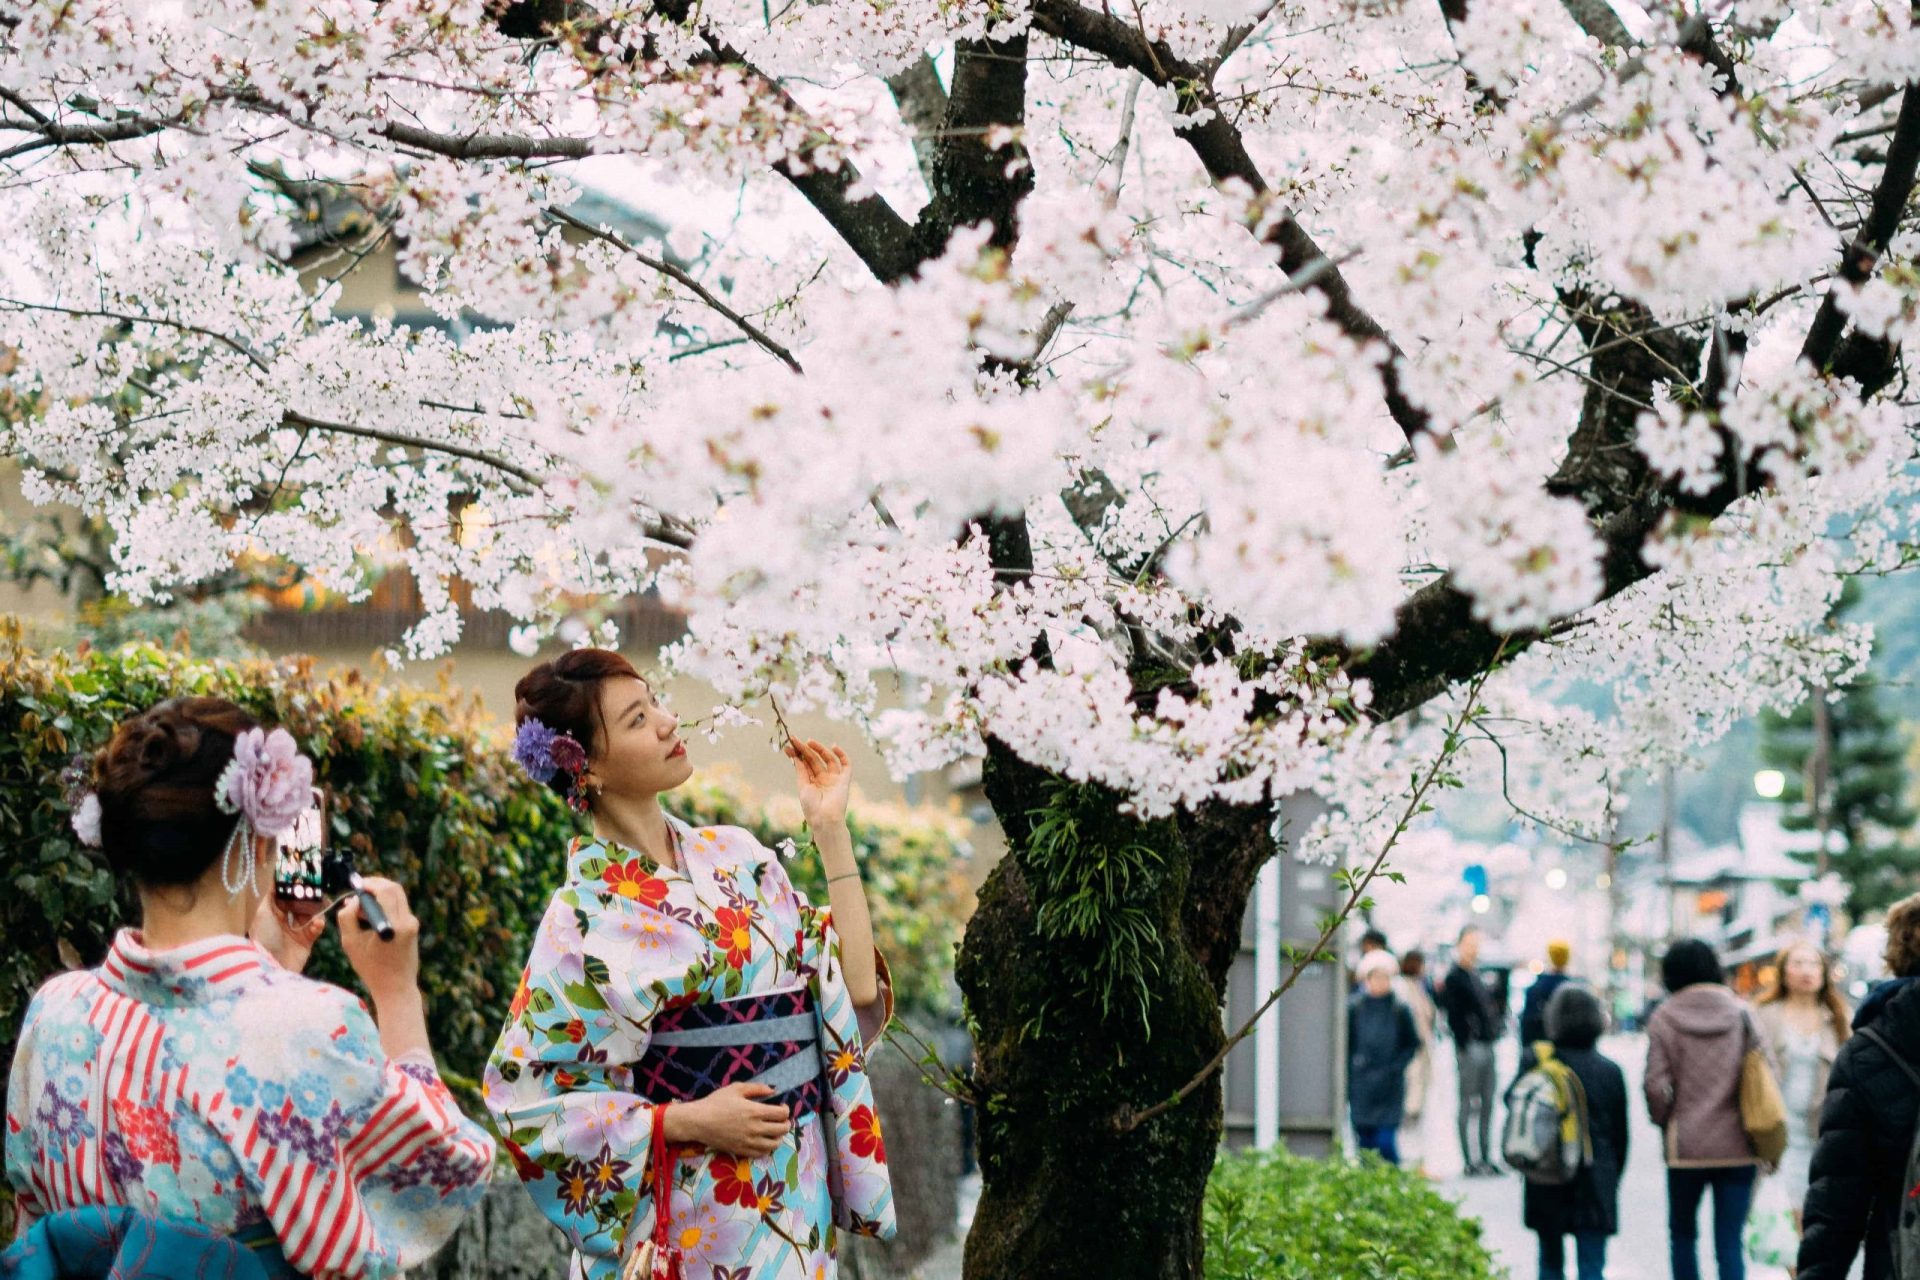 capturing picture of a girl in kimono under the cherry blossom tree